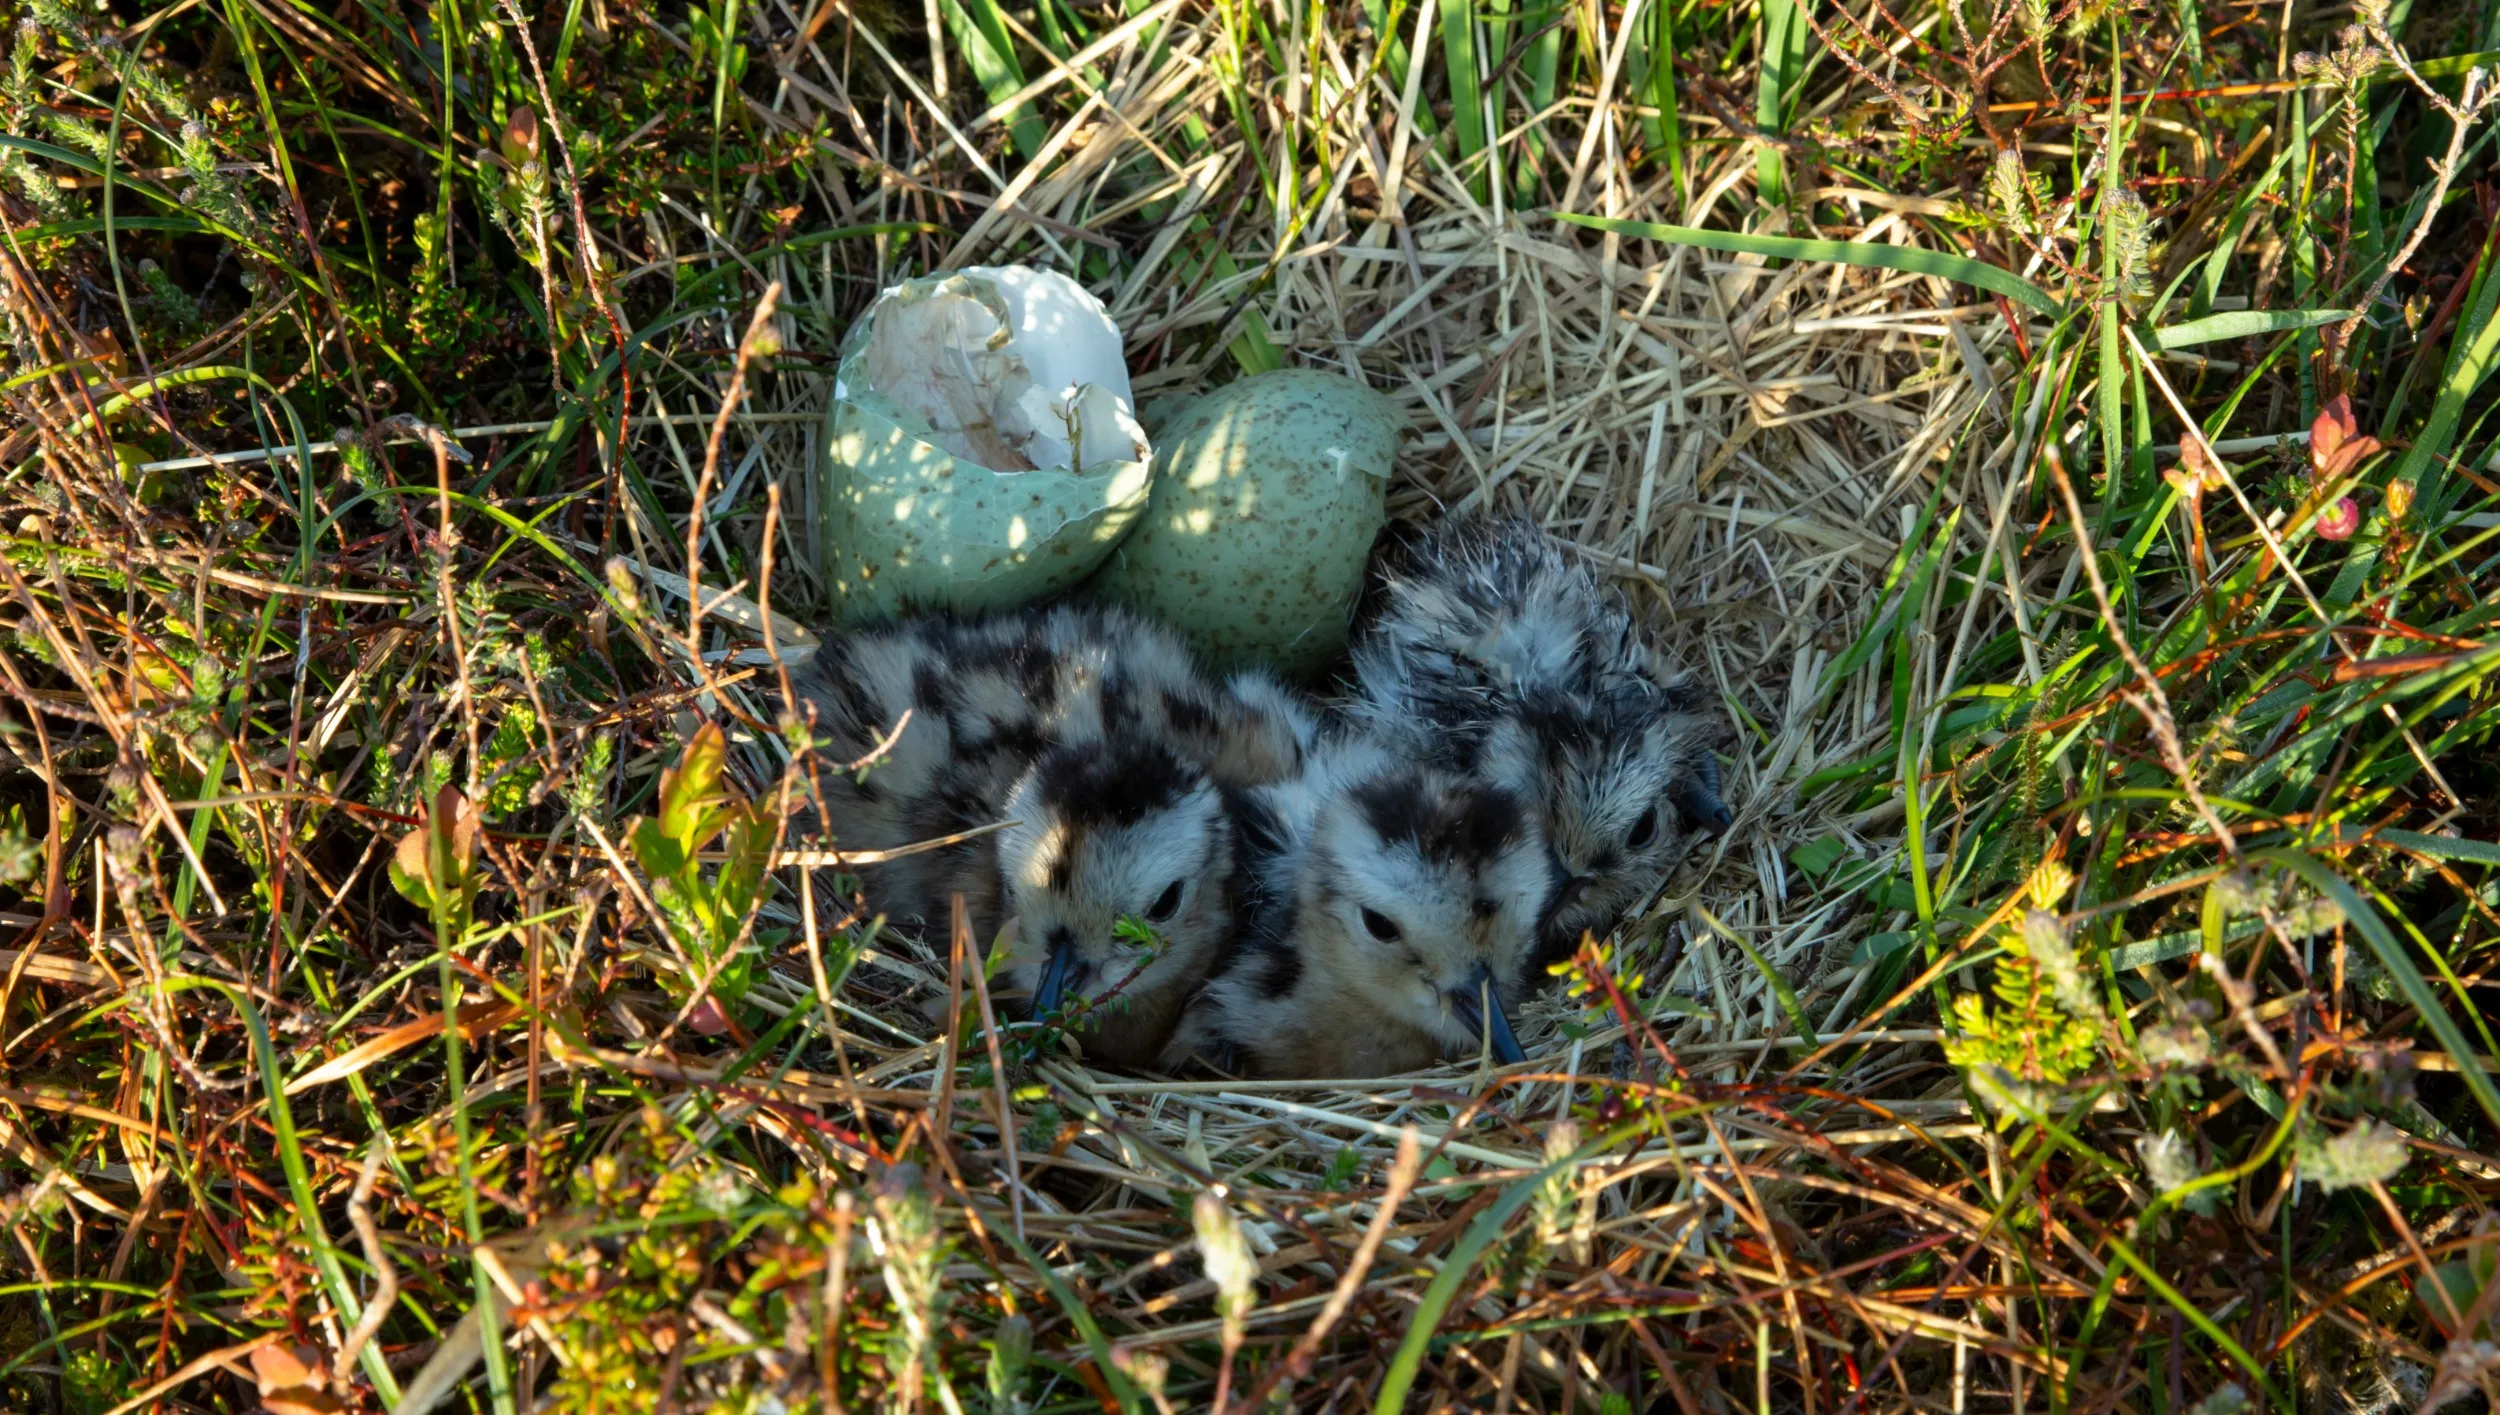 Three Curlew chicks in the nest, recently hatched with shell still visible.